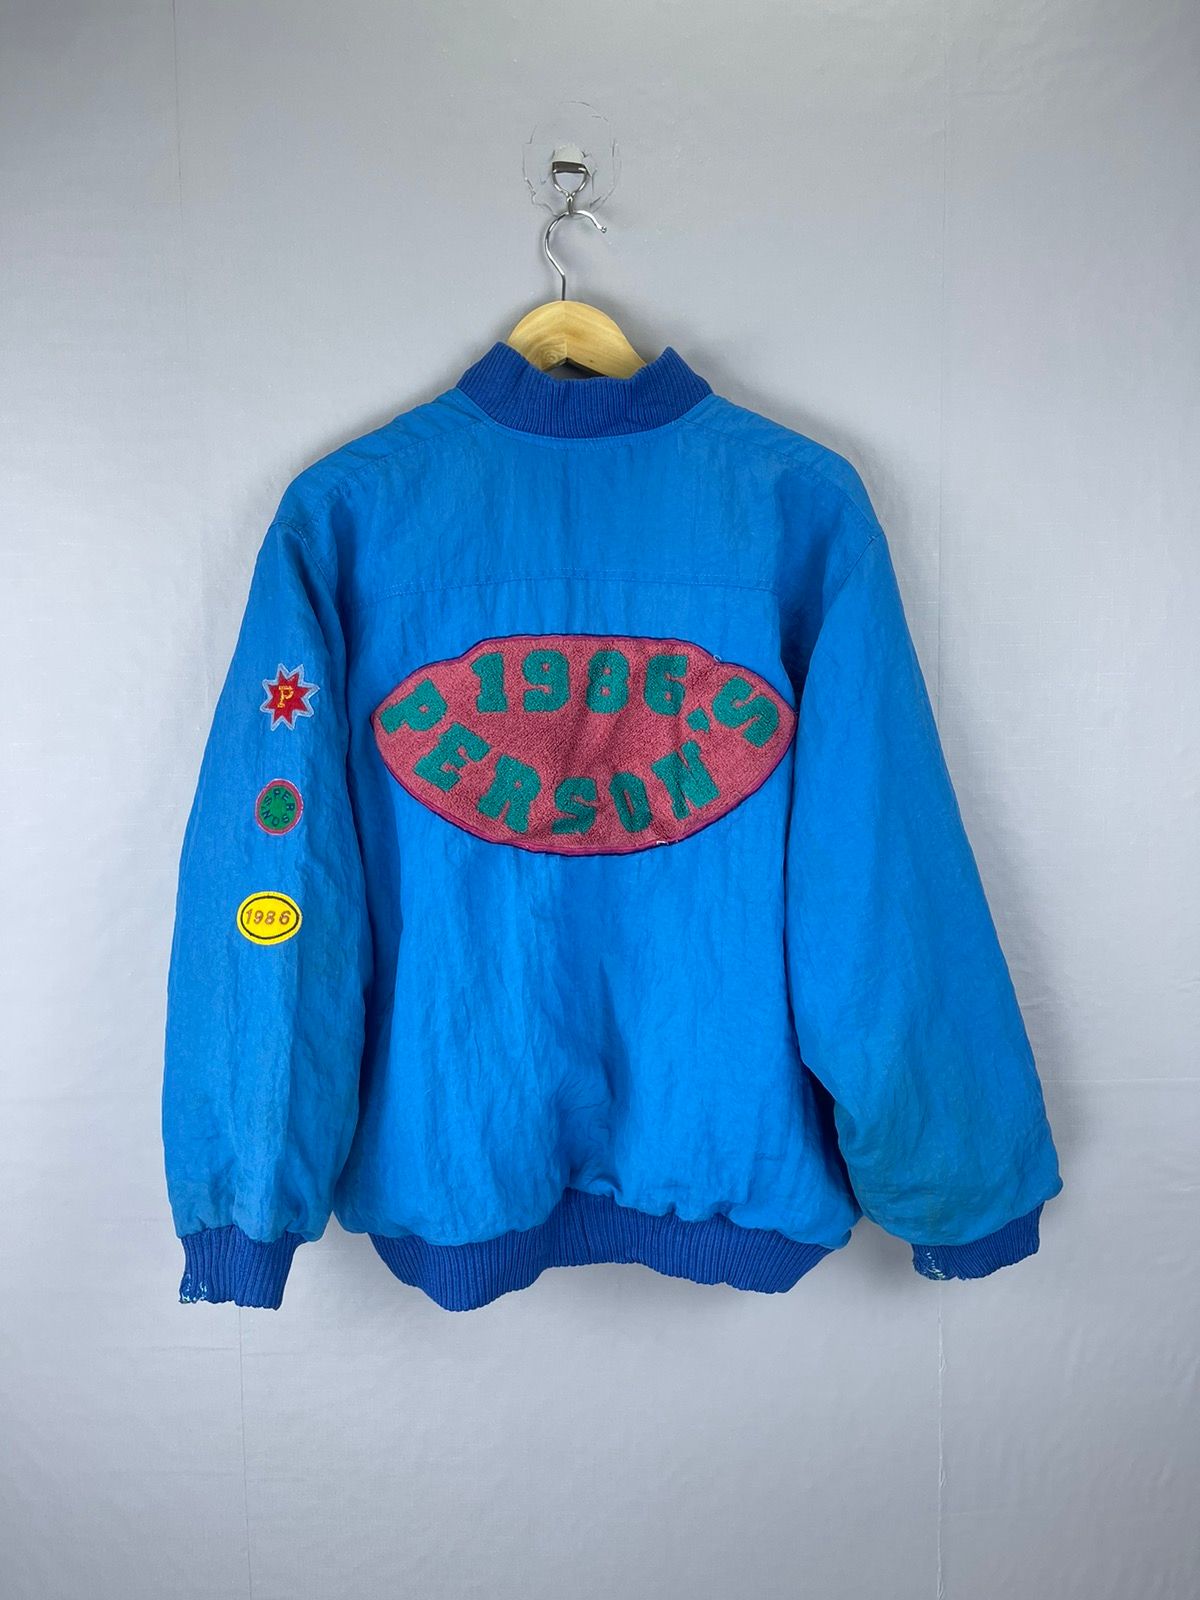 Pre-owned Bomber Jacket X Persons Vintage Person's 1986 Big Carpet Patches Bomber Jacket In Blue